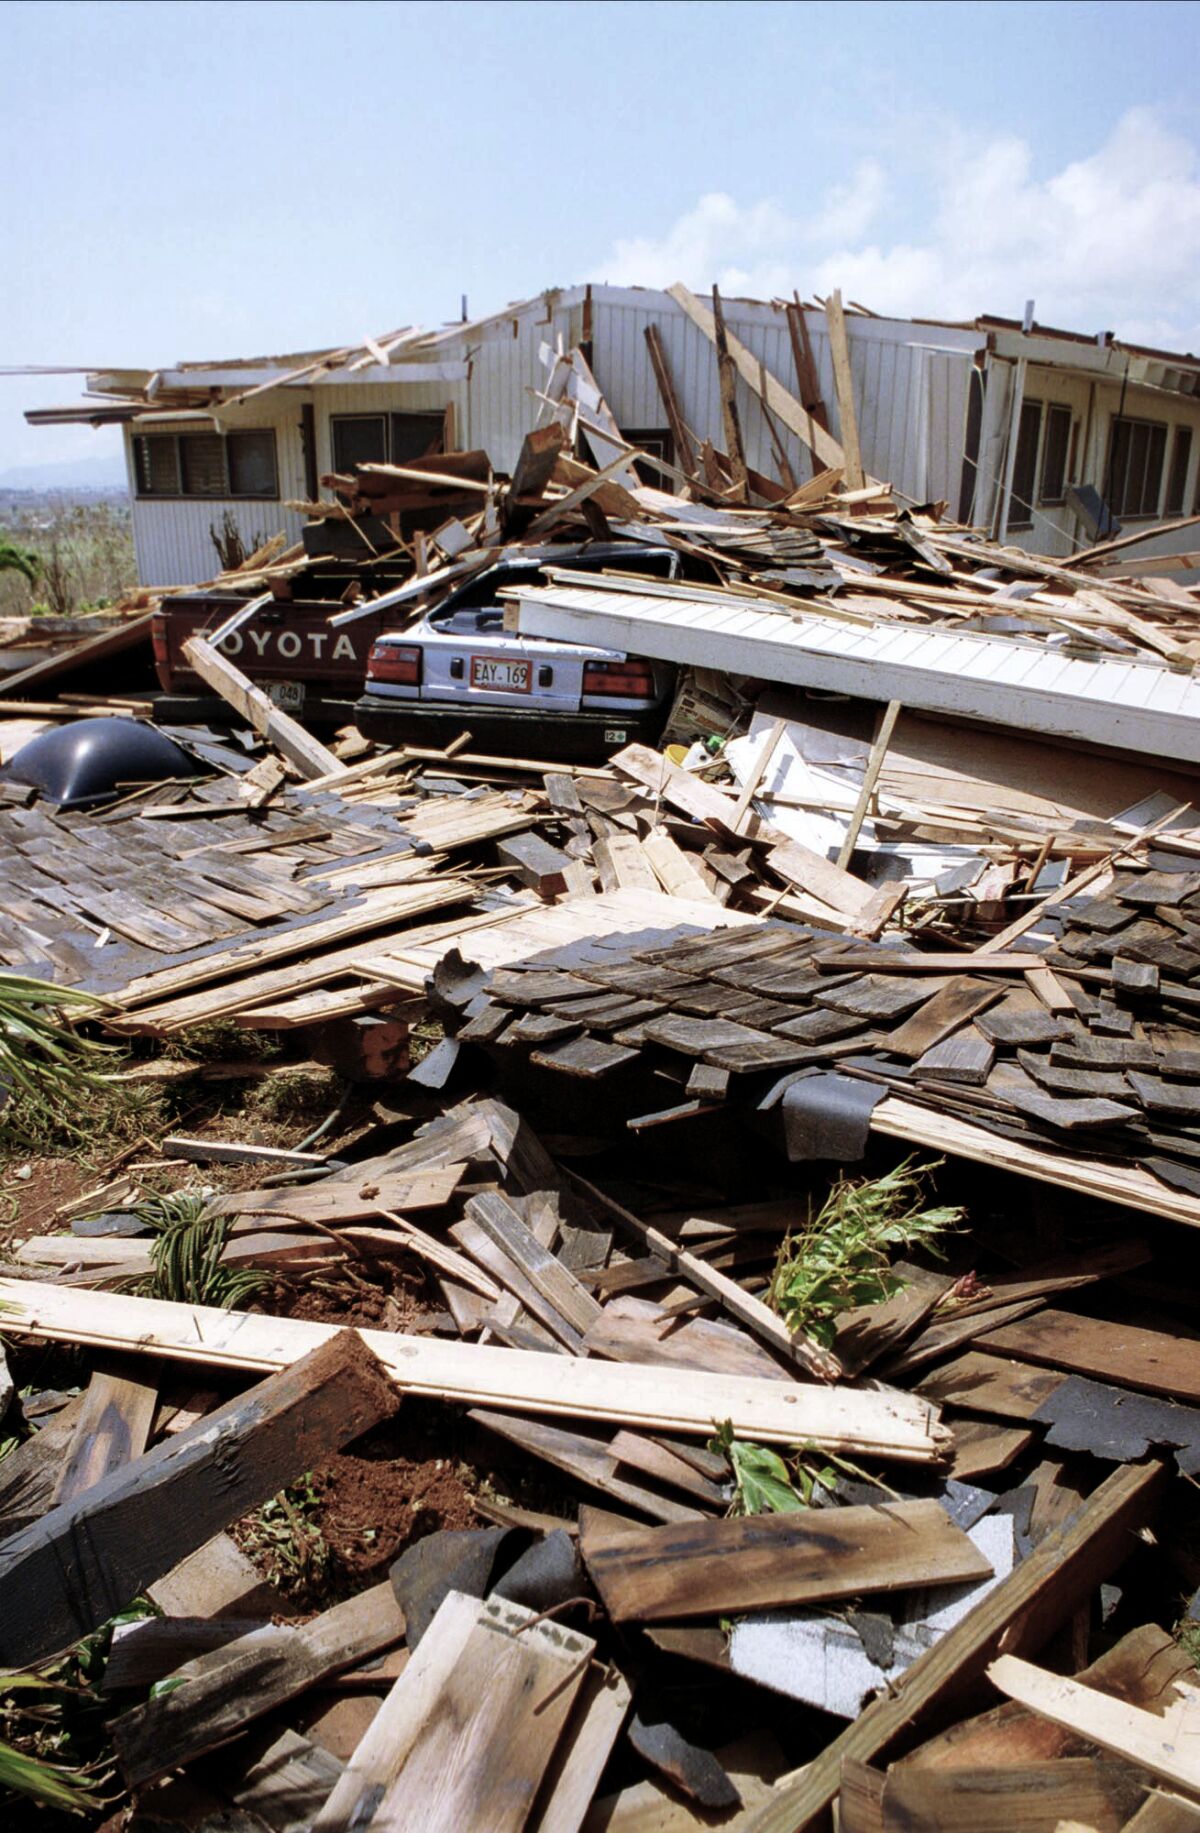 A car and a pickup truck are buried under the rubble of a home severely damaged by a hurricane